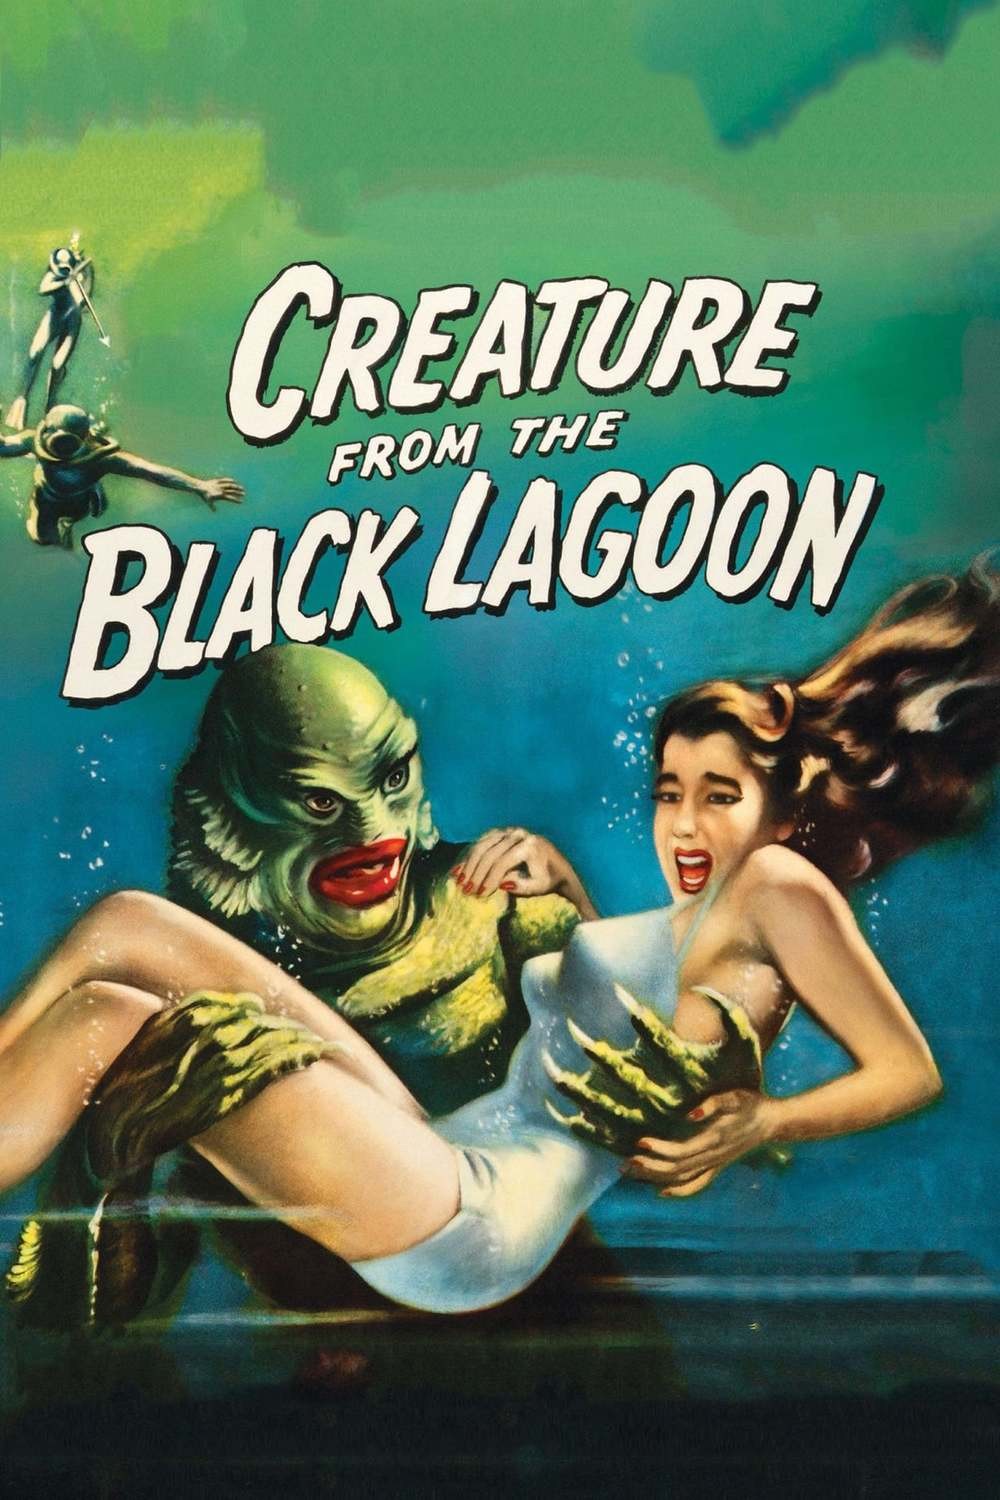 CREATURE FROM THE BLACK LAGOON [1954]